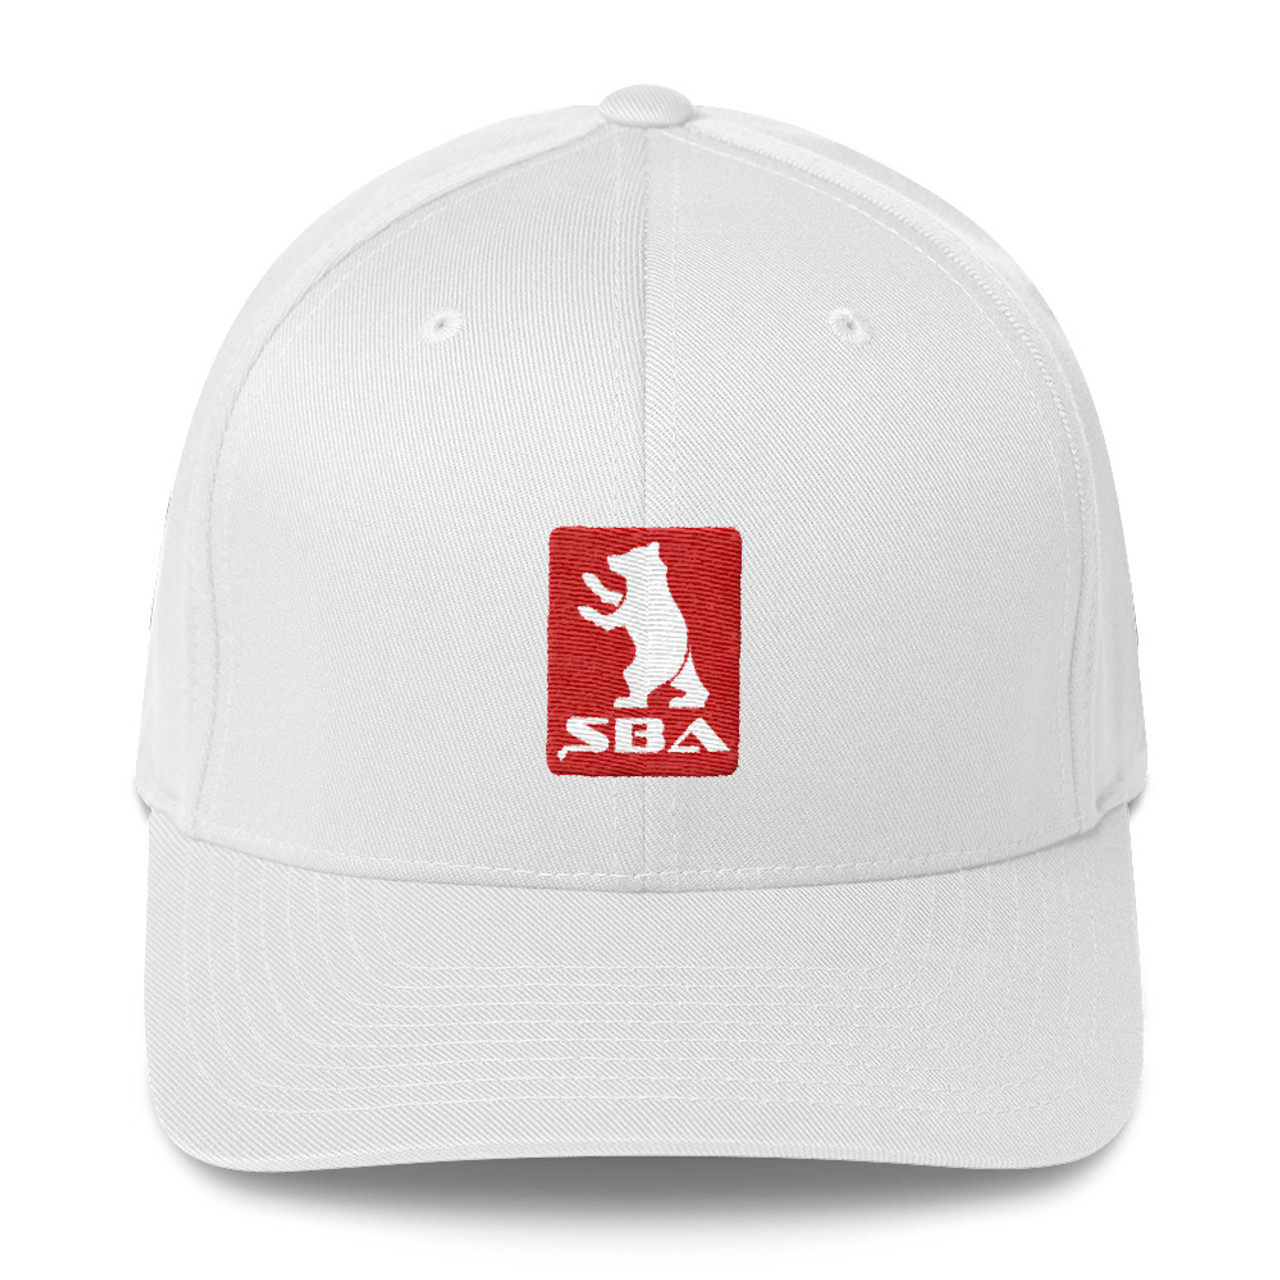 Classic Series Structured Twill 6 Panel Cap in White - SBA Gear